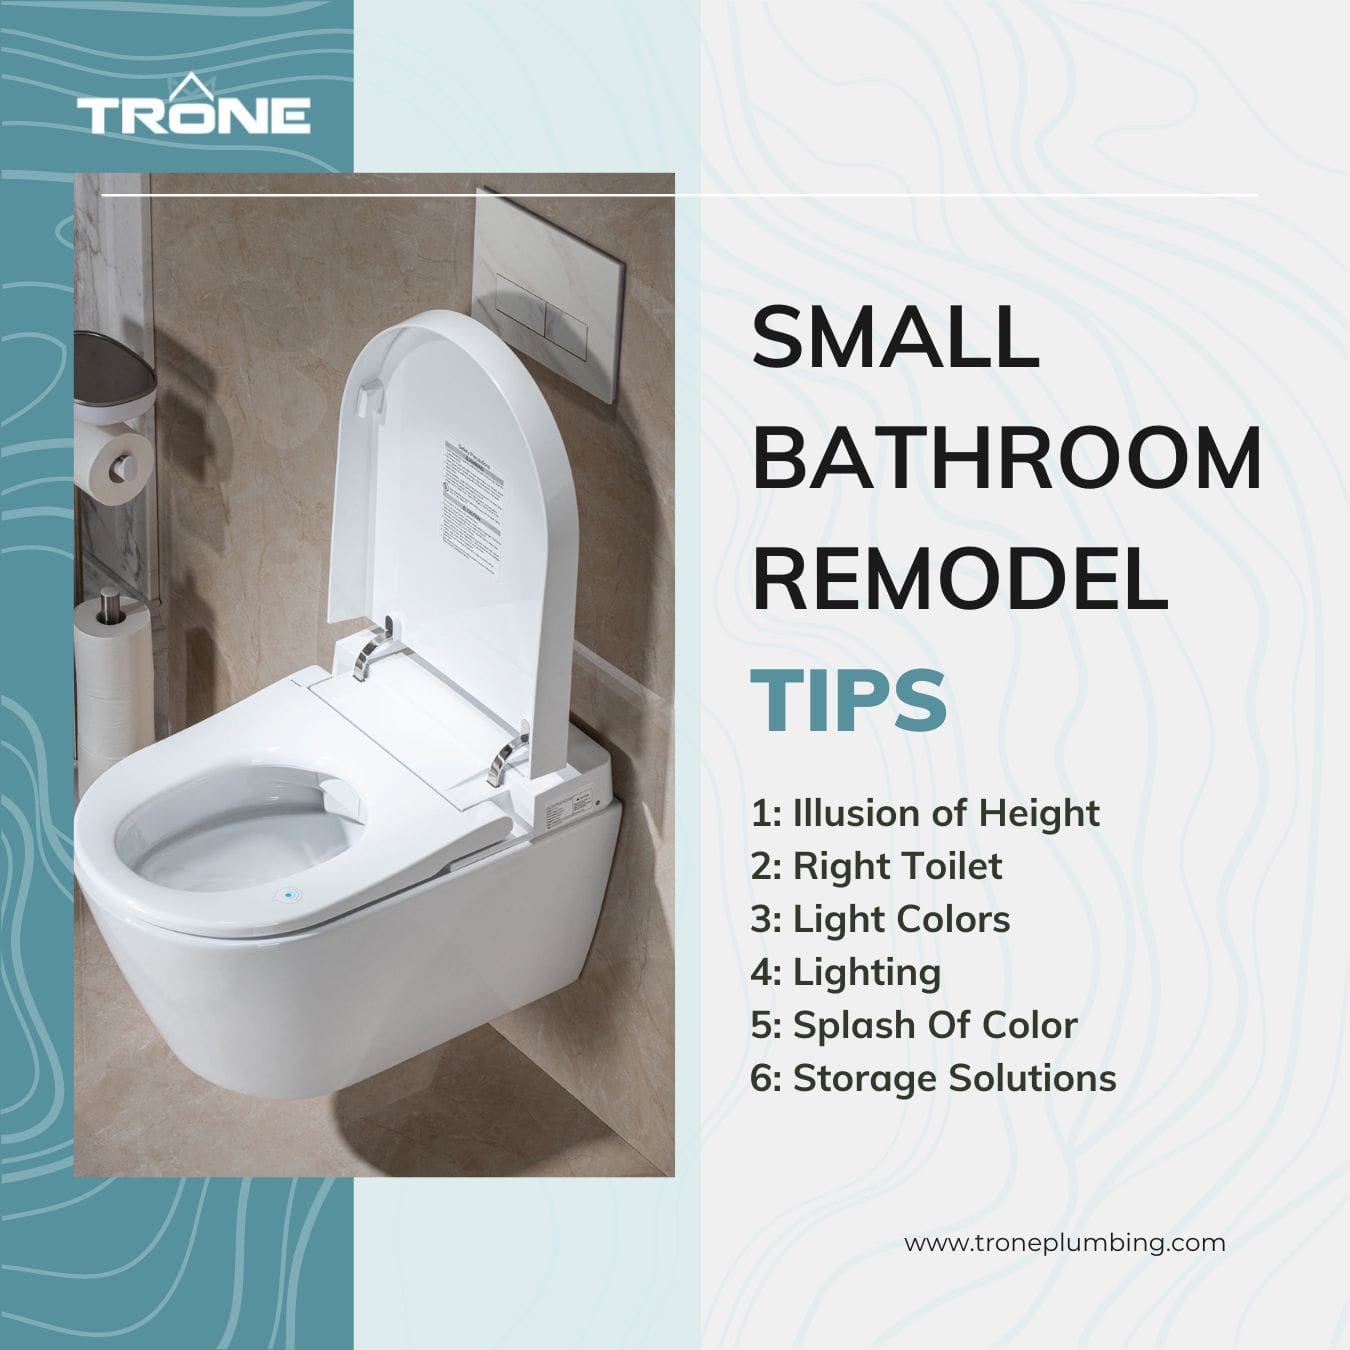 An infographic featuring the Trone Wall Hung Bidet Toilet.